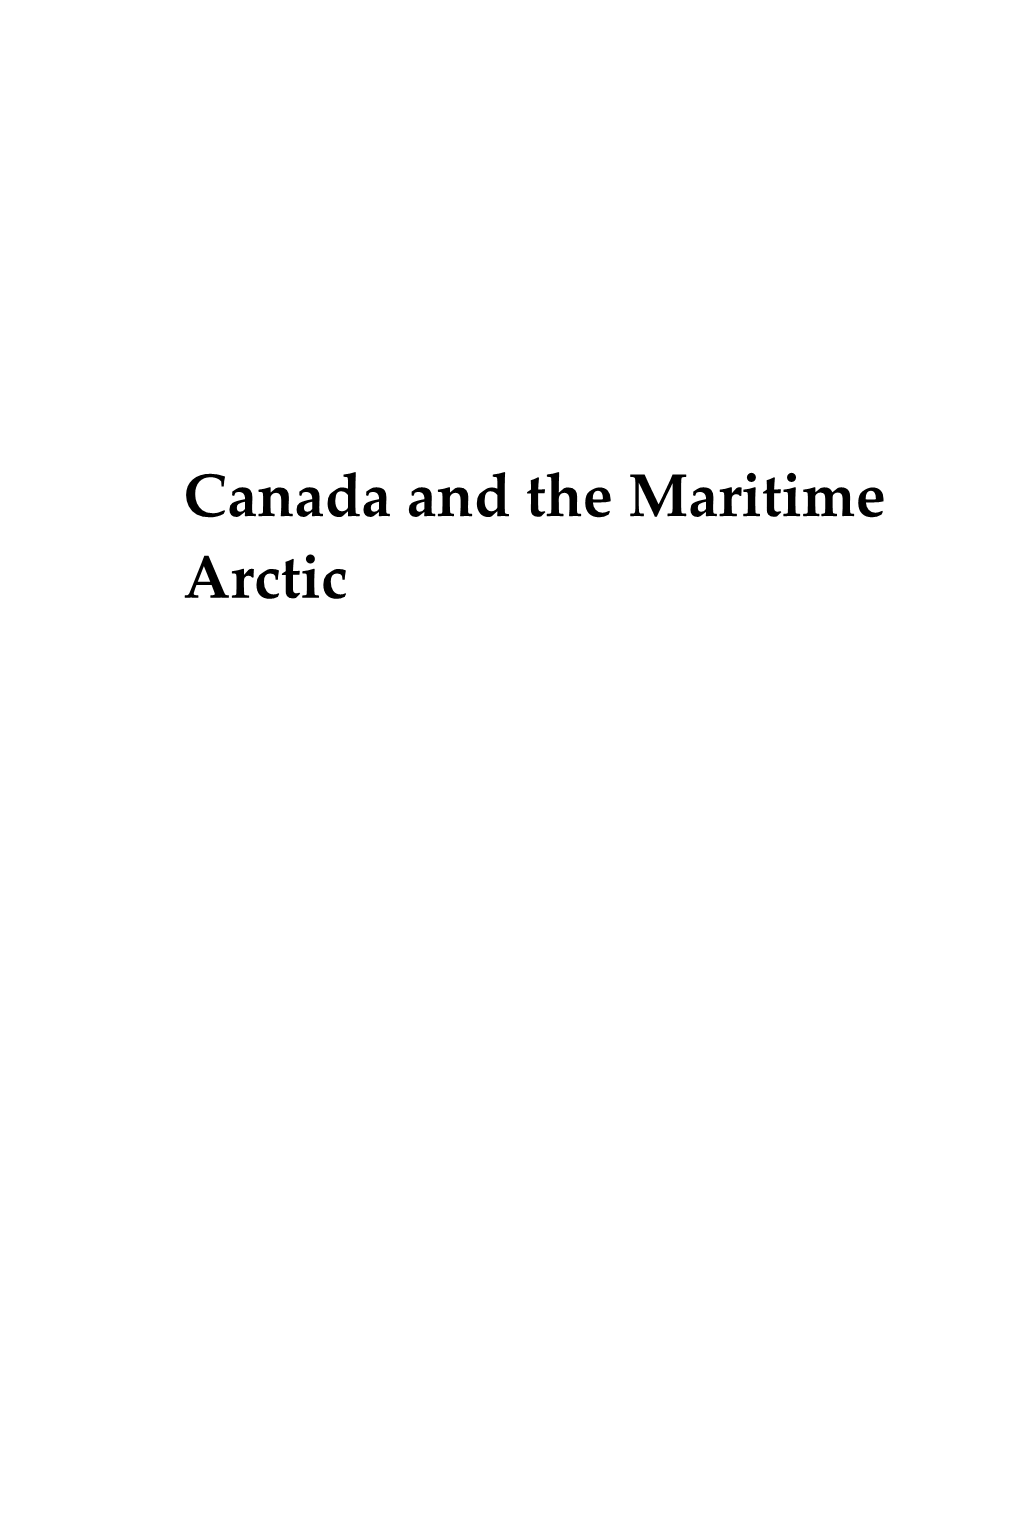 Canada and the Maritime Arctic